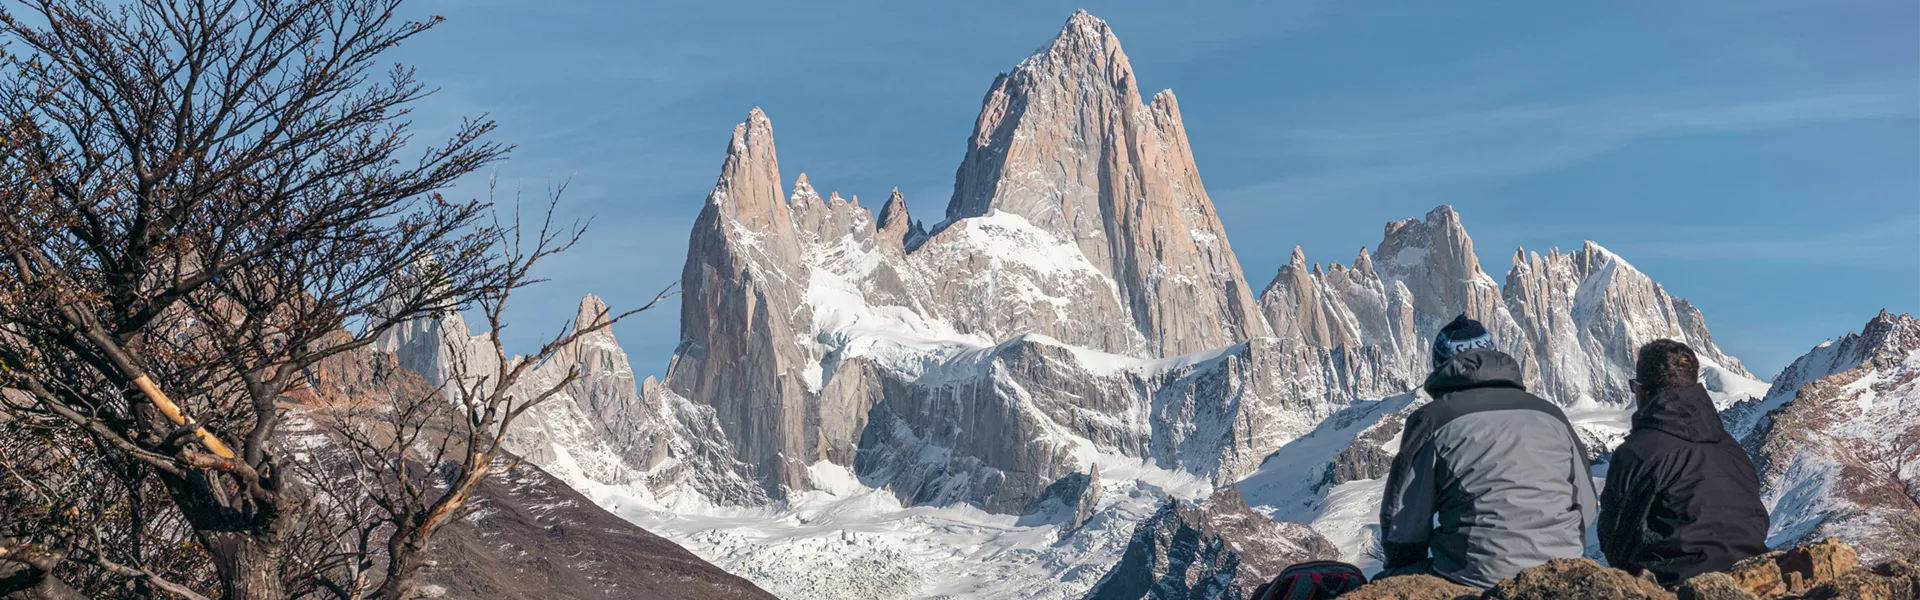 Travellers looking on Patagonia mountains